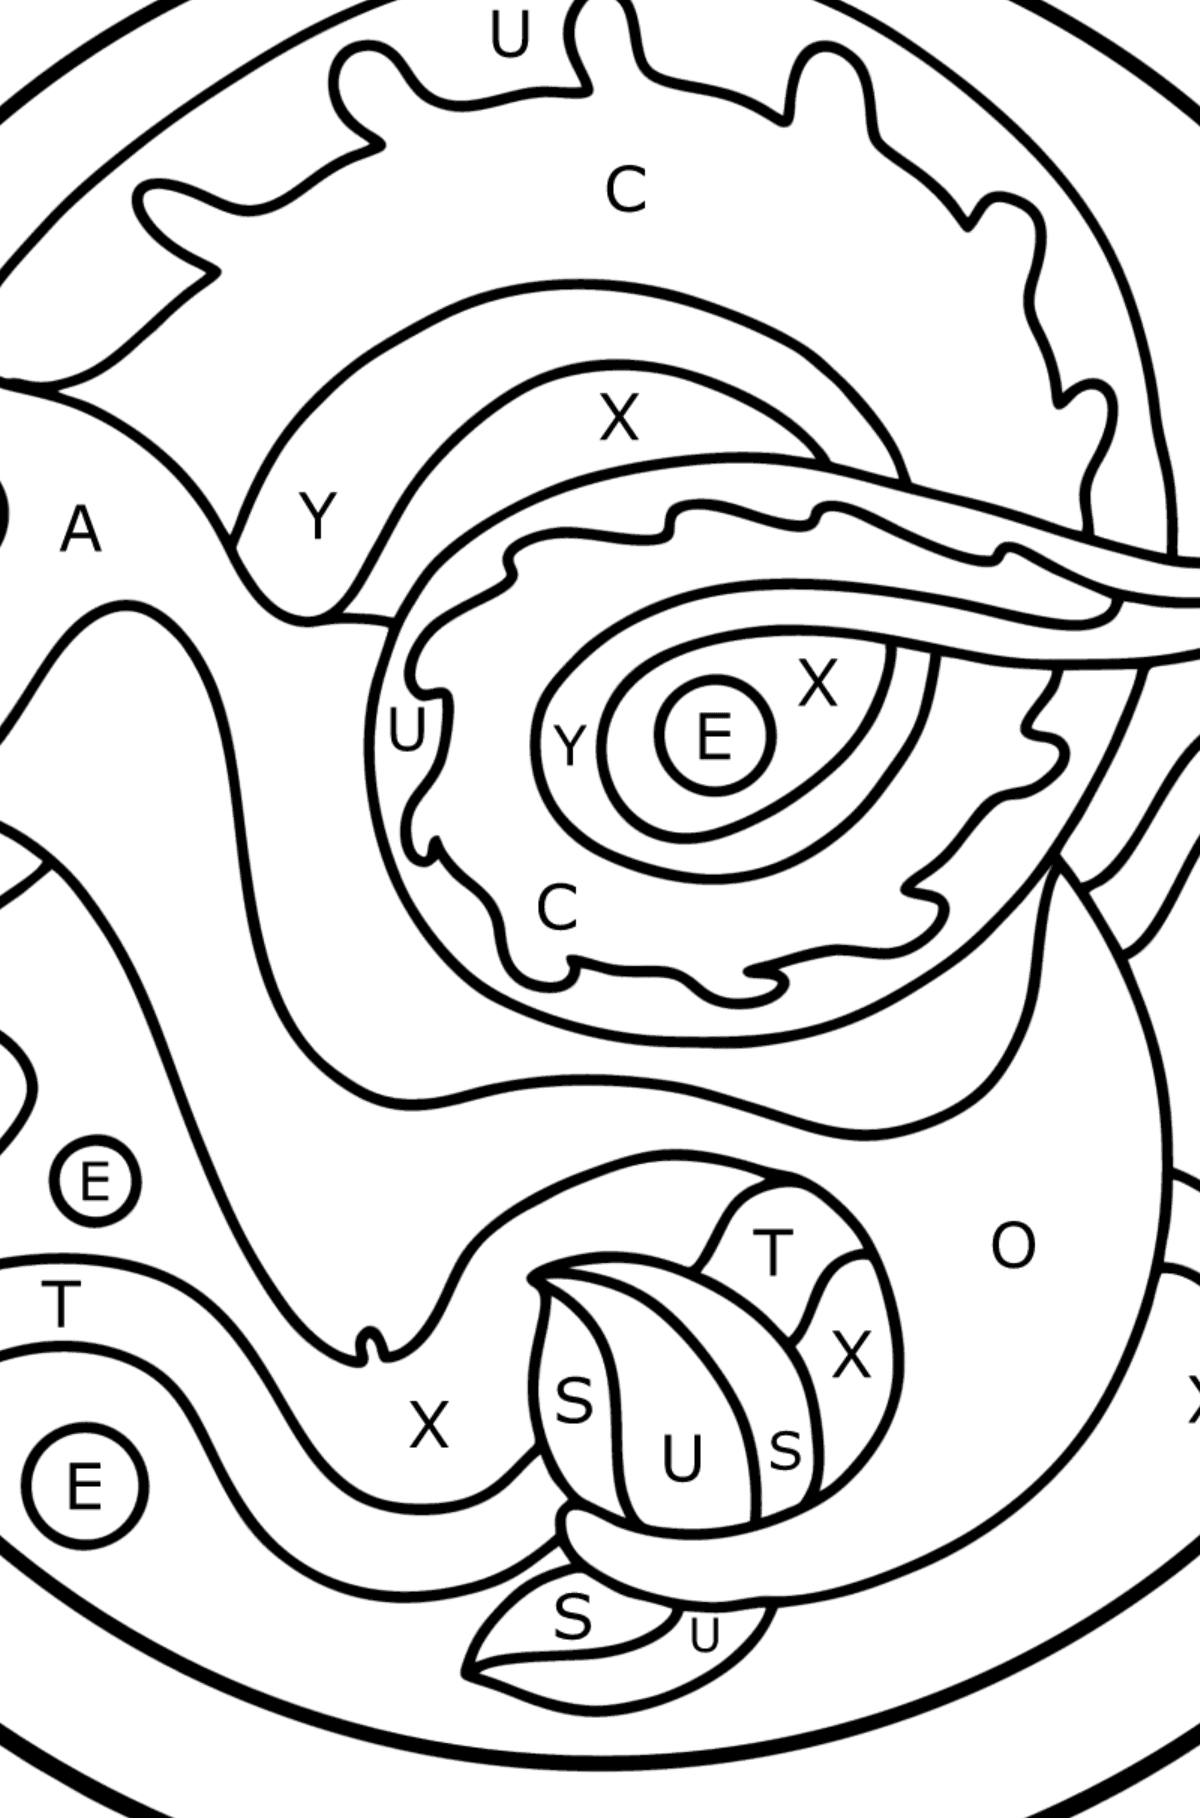 Coloring page for kids - Capricorn zodiac sign - Coloring by Letters for Kids